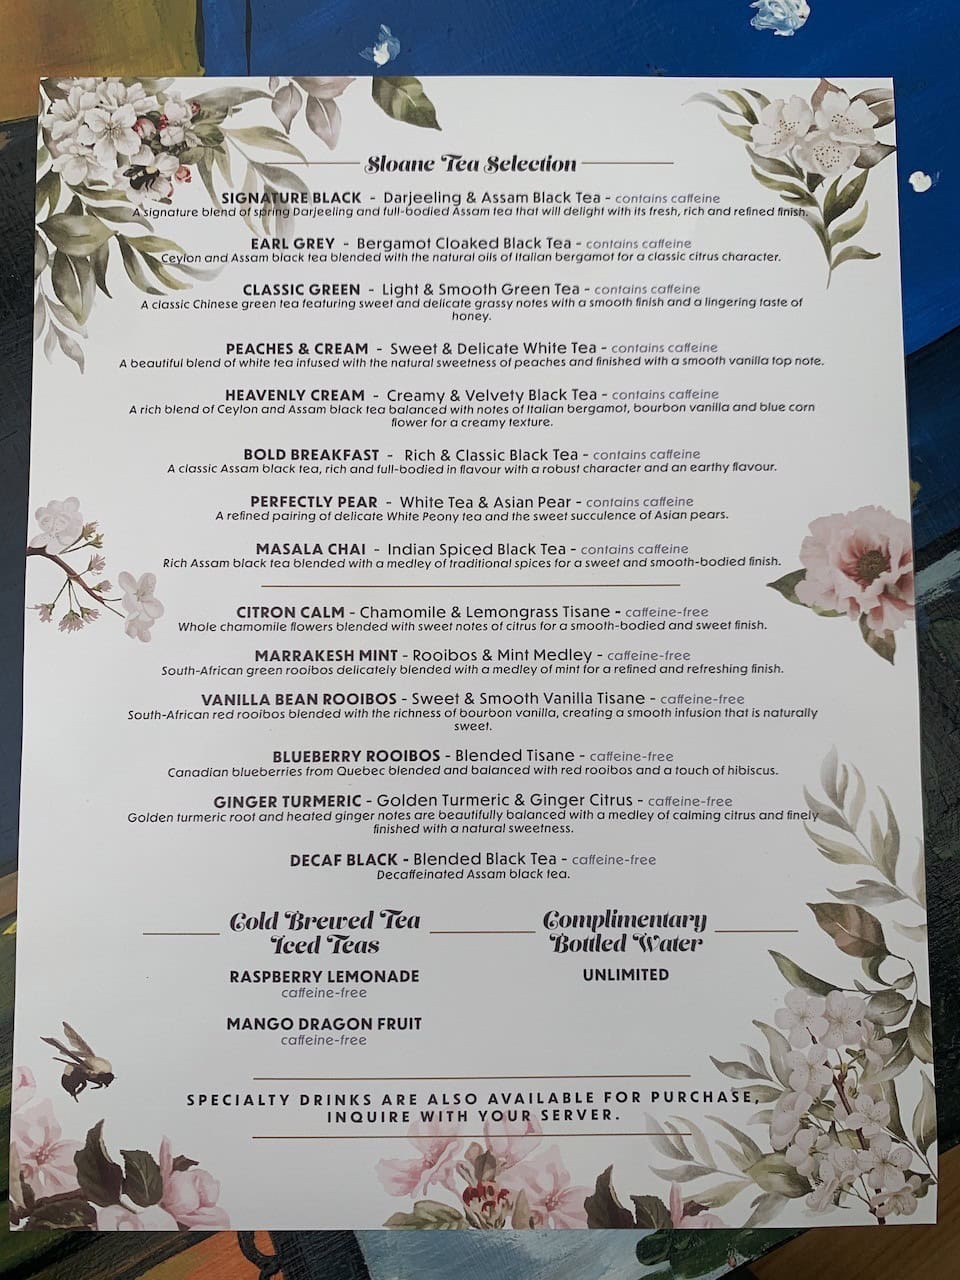 Sloane Tea Menu at the Watering Can Flower Market in Vineland Ontario Canada  - Heavenly Cream is my absolute favourite Sloane Tea on this fantastic tea menu at the Watering Can in Vineland, Ontario, Canada.